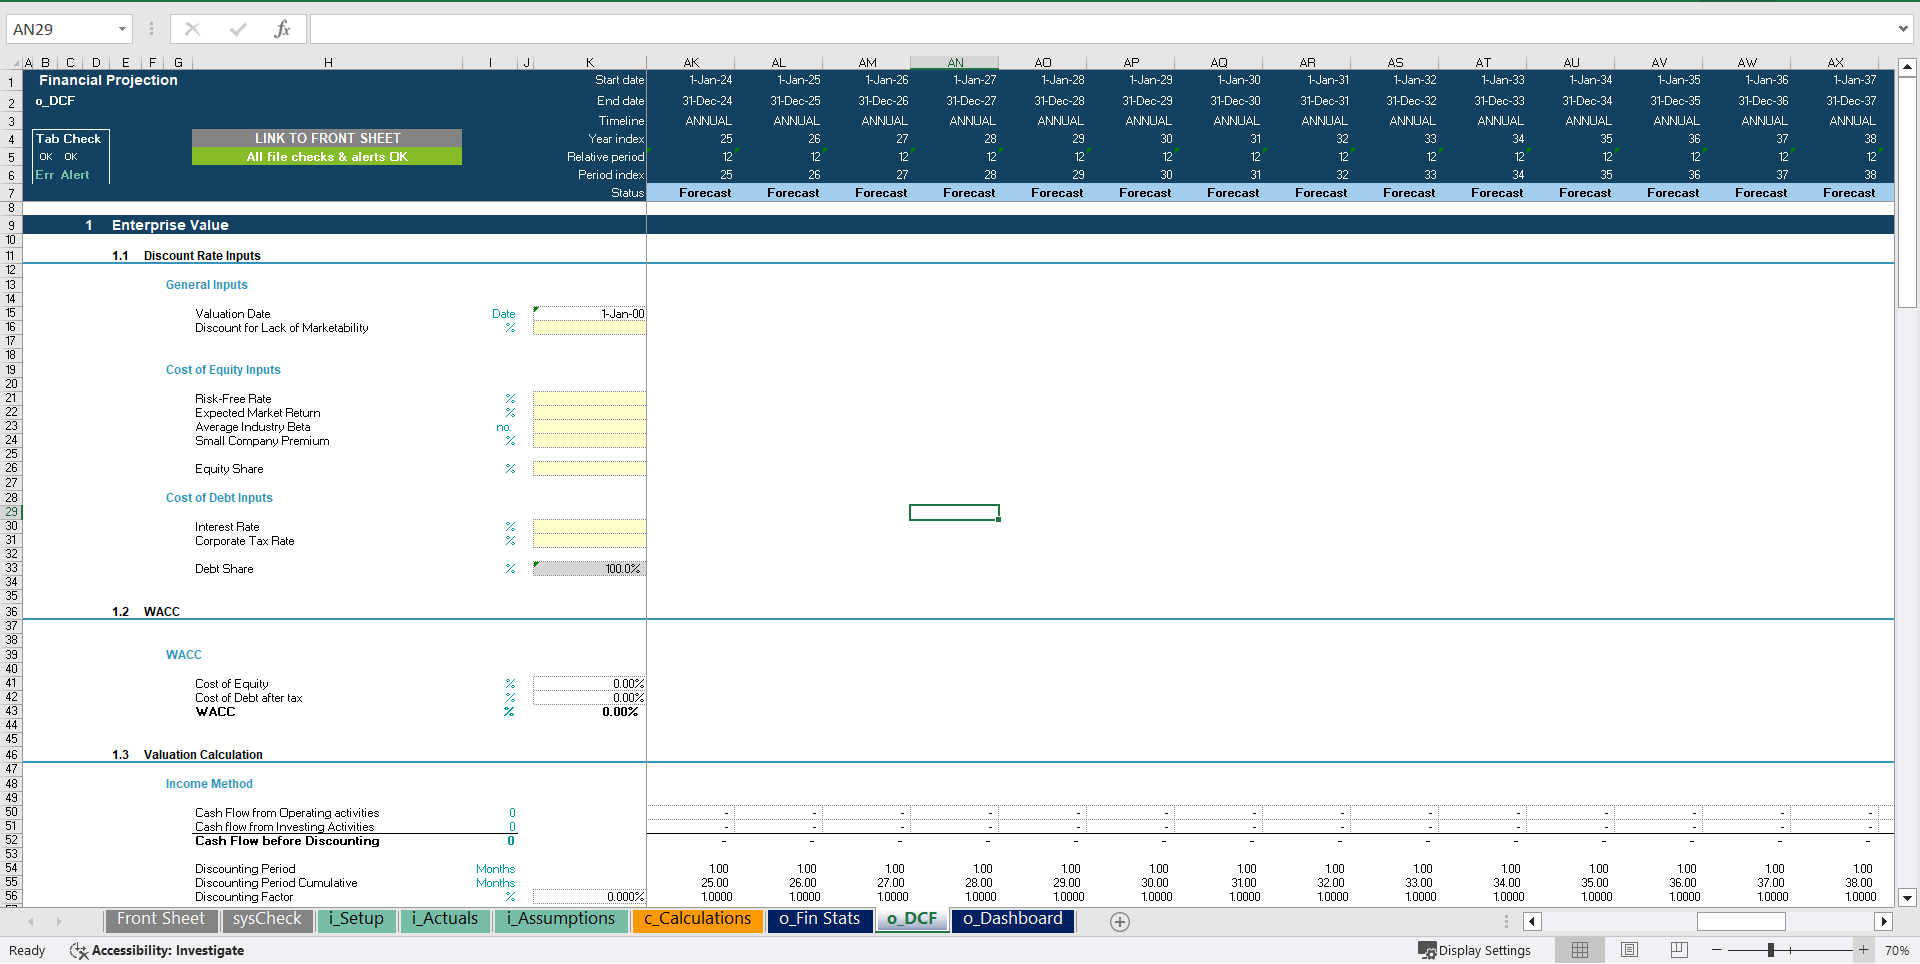 Wind Farm Investment 3 Statement Financial Projection Model (Excel template (XLSX)) Preview Image